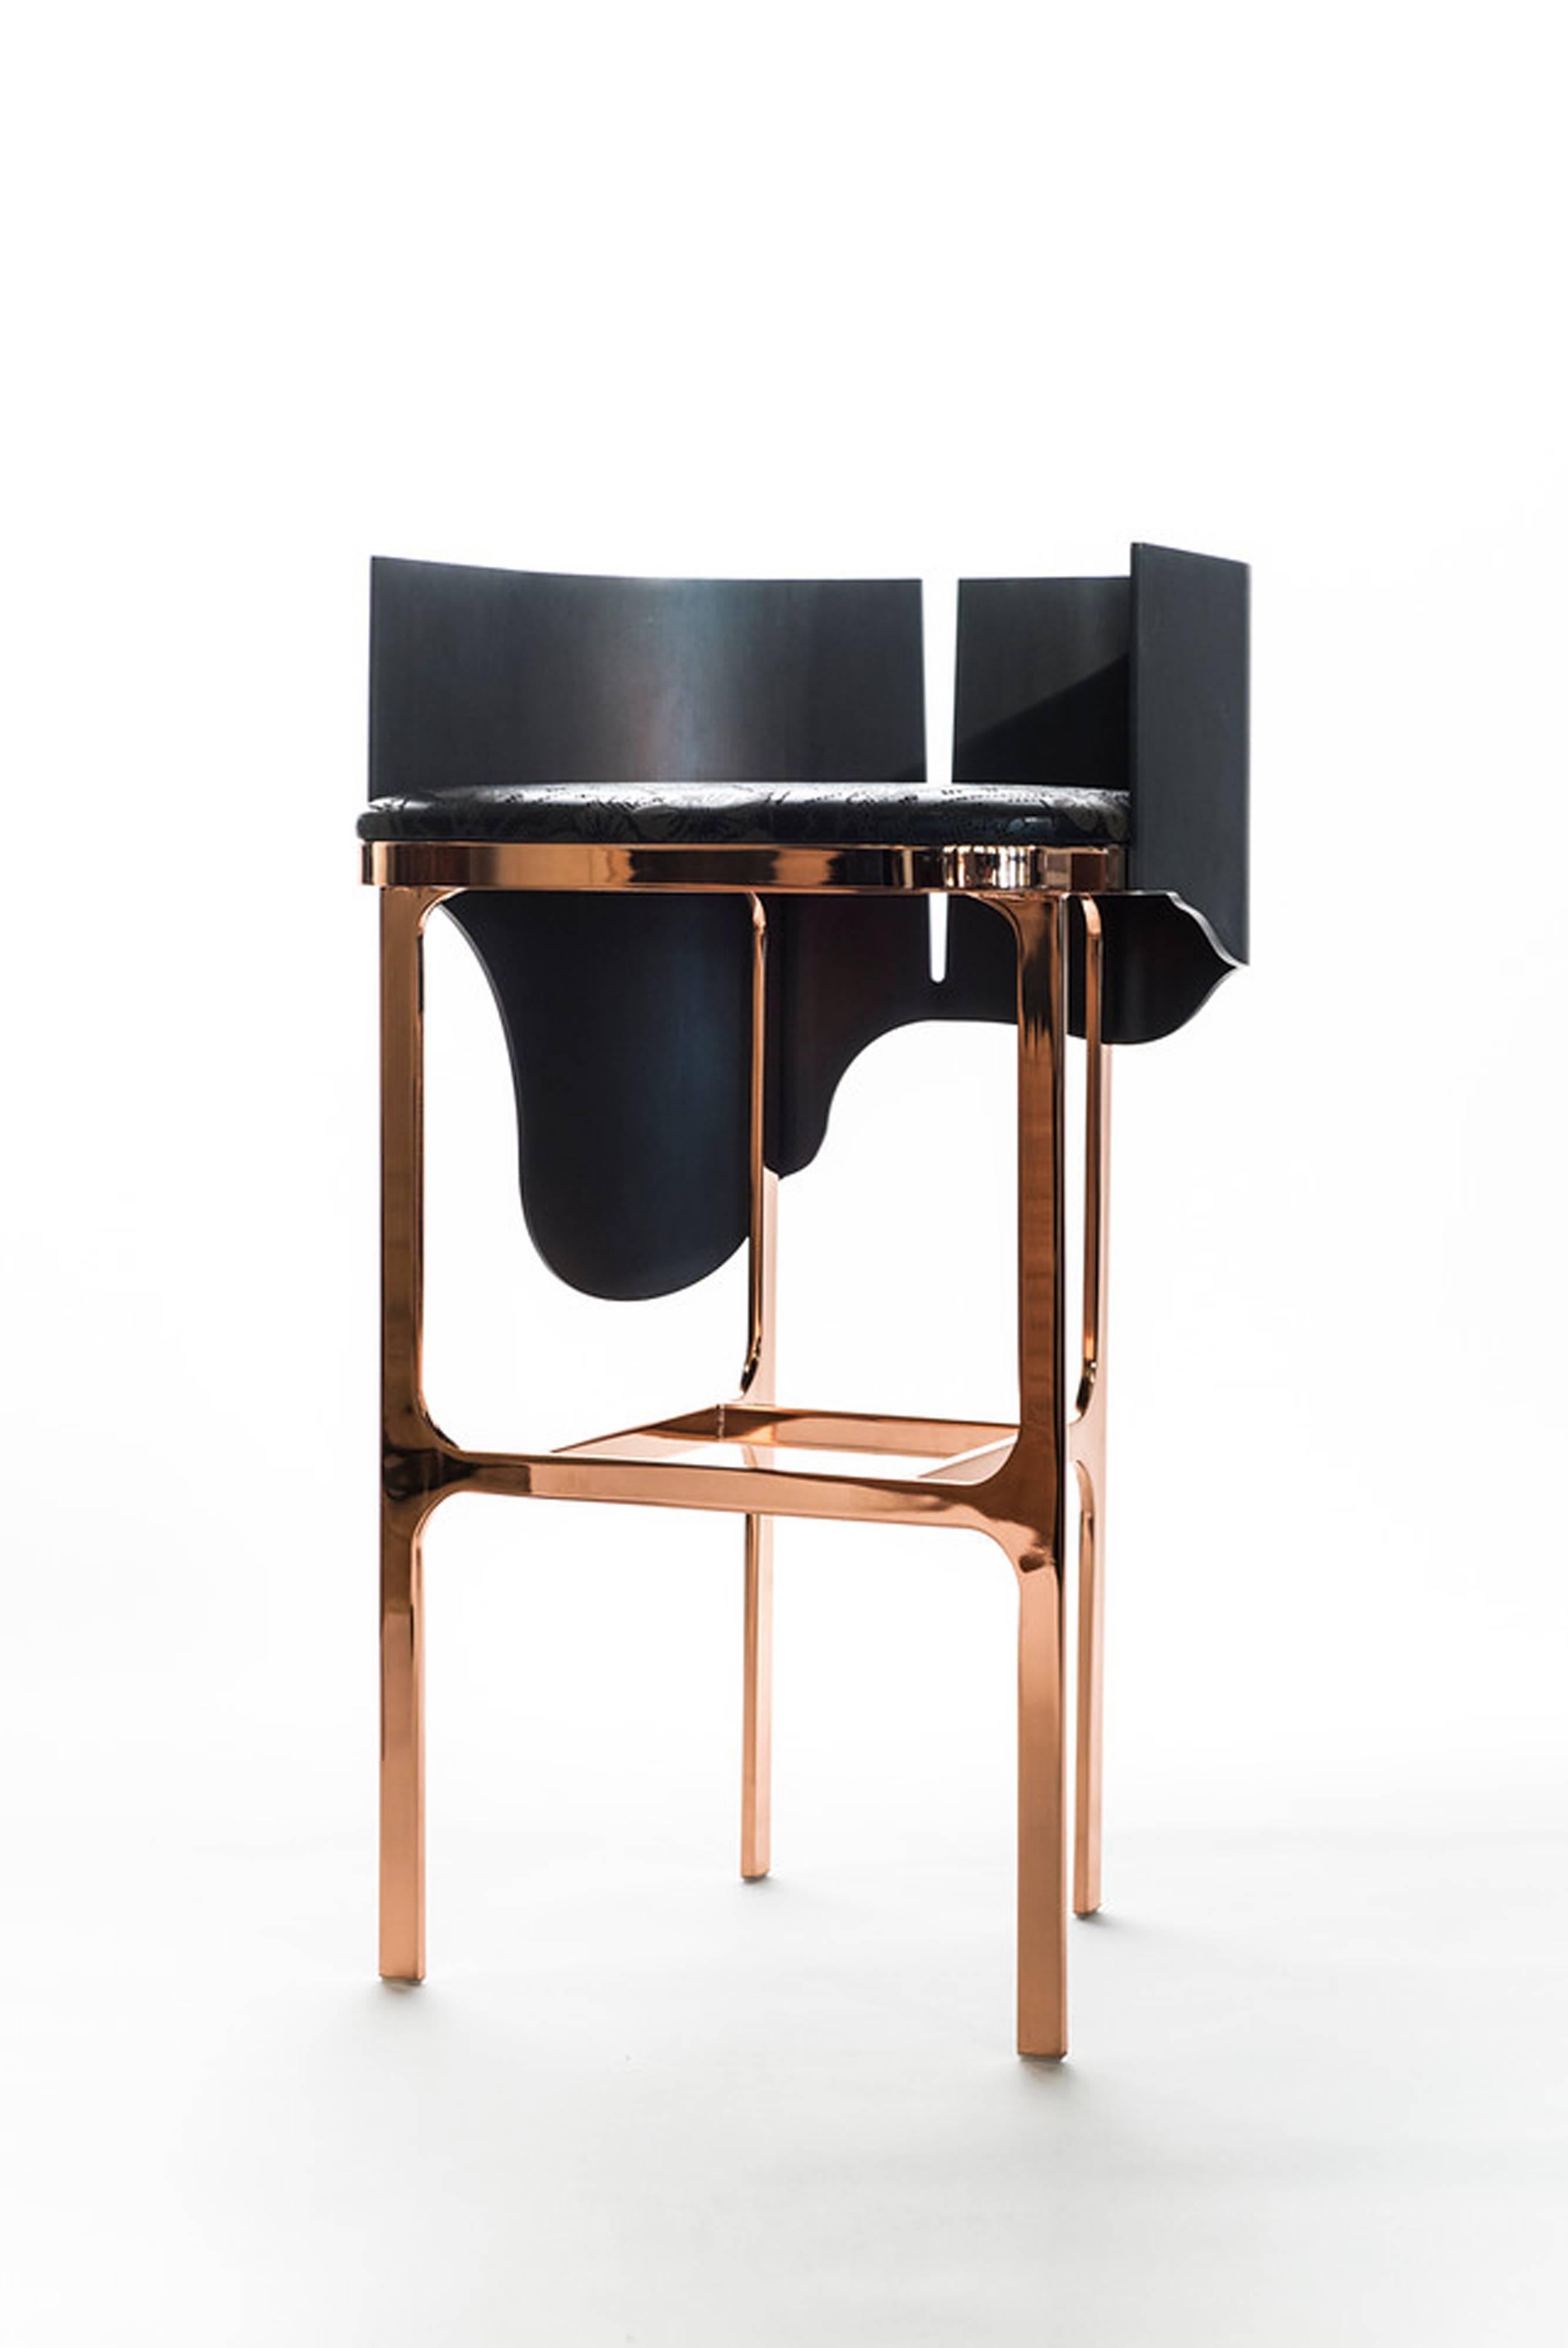 Gulla Jónsdóttir
Lava Barstool, 2015
Polished rose gold finish on steel, oil rubbed bronze finish on steel, perforated leather
18.5 x 16 x 32 in
Edition of 25

Gulla Jónsdóttir created Lava Bar Stool using polished rose gold finish on steel, oil